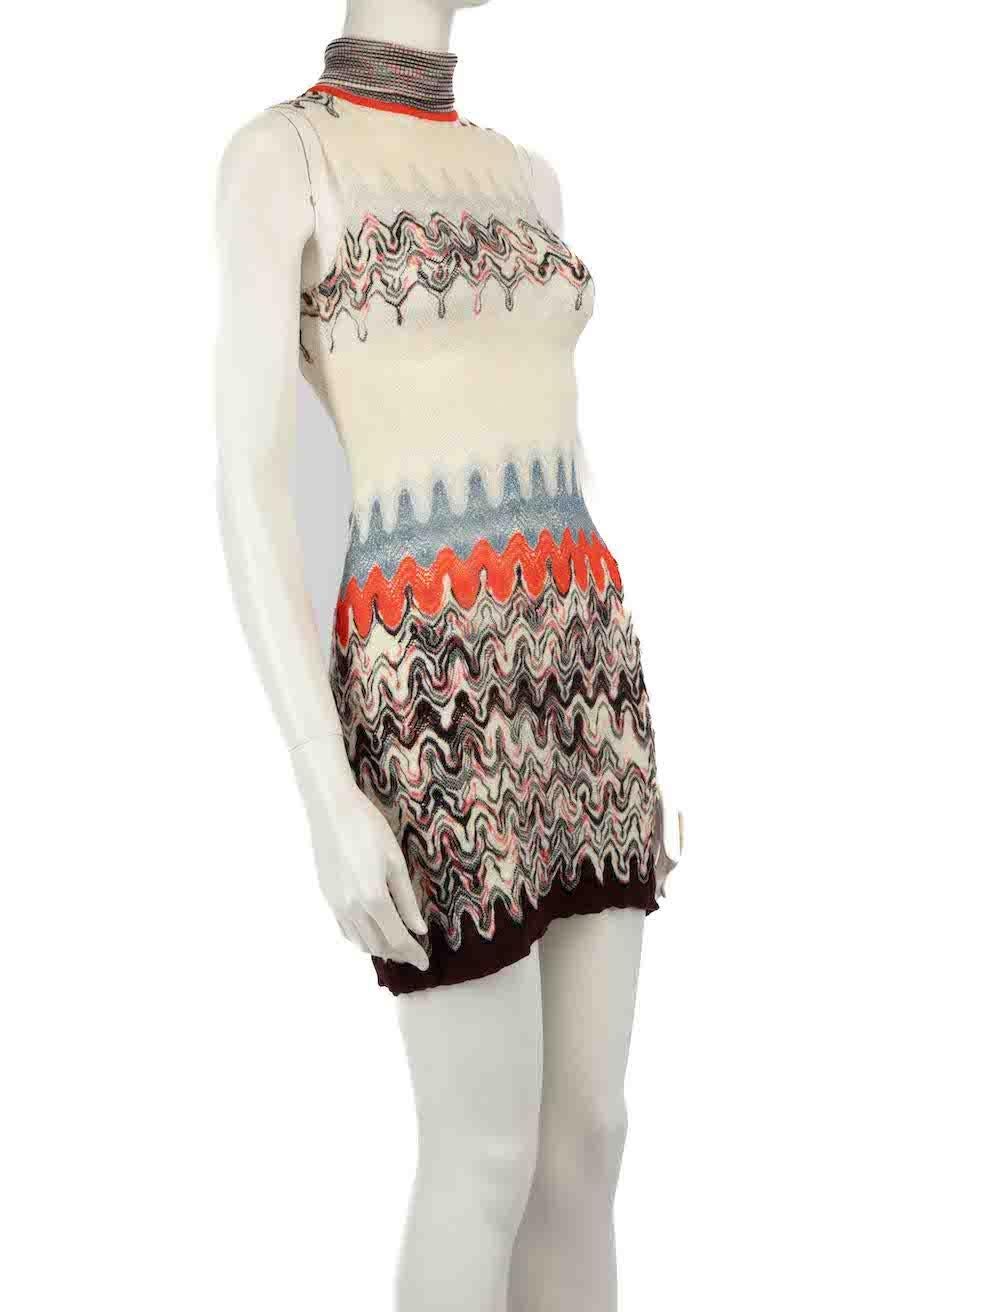 CONDITION is Very good. Hardly any visible wear to dress is evident on this used Missoni designer resale item.
 
 
 
 Details
 
 
 Multicolour
 
 Wool
 
 Knit dress
 
 Abstract pattern
 
 Turtleneck
 
 Sleeveless
 
 Mini
 
 Stretchy
 
 
 
 
 
 Made